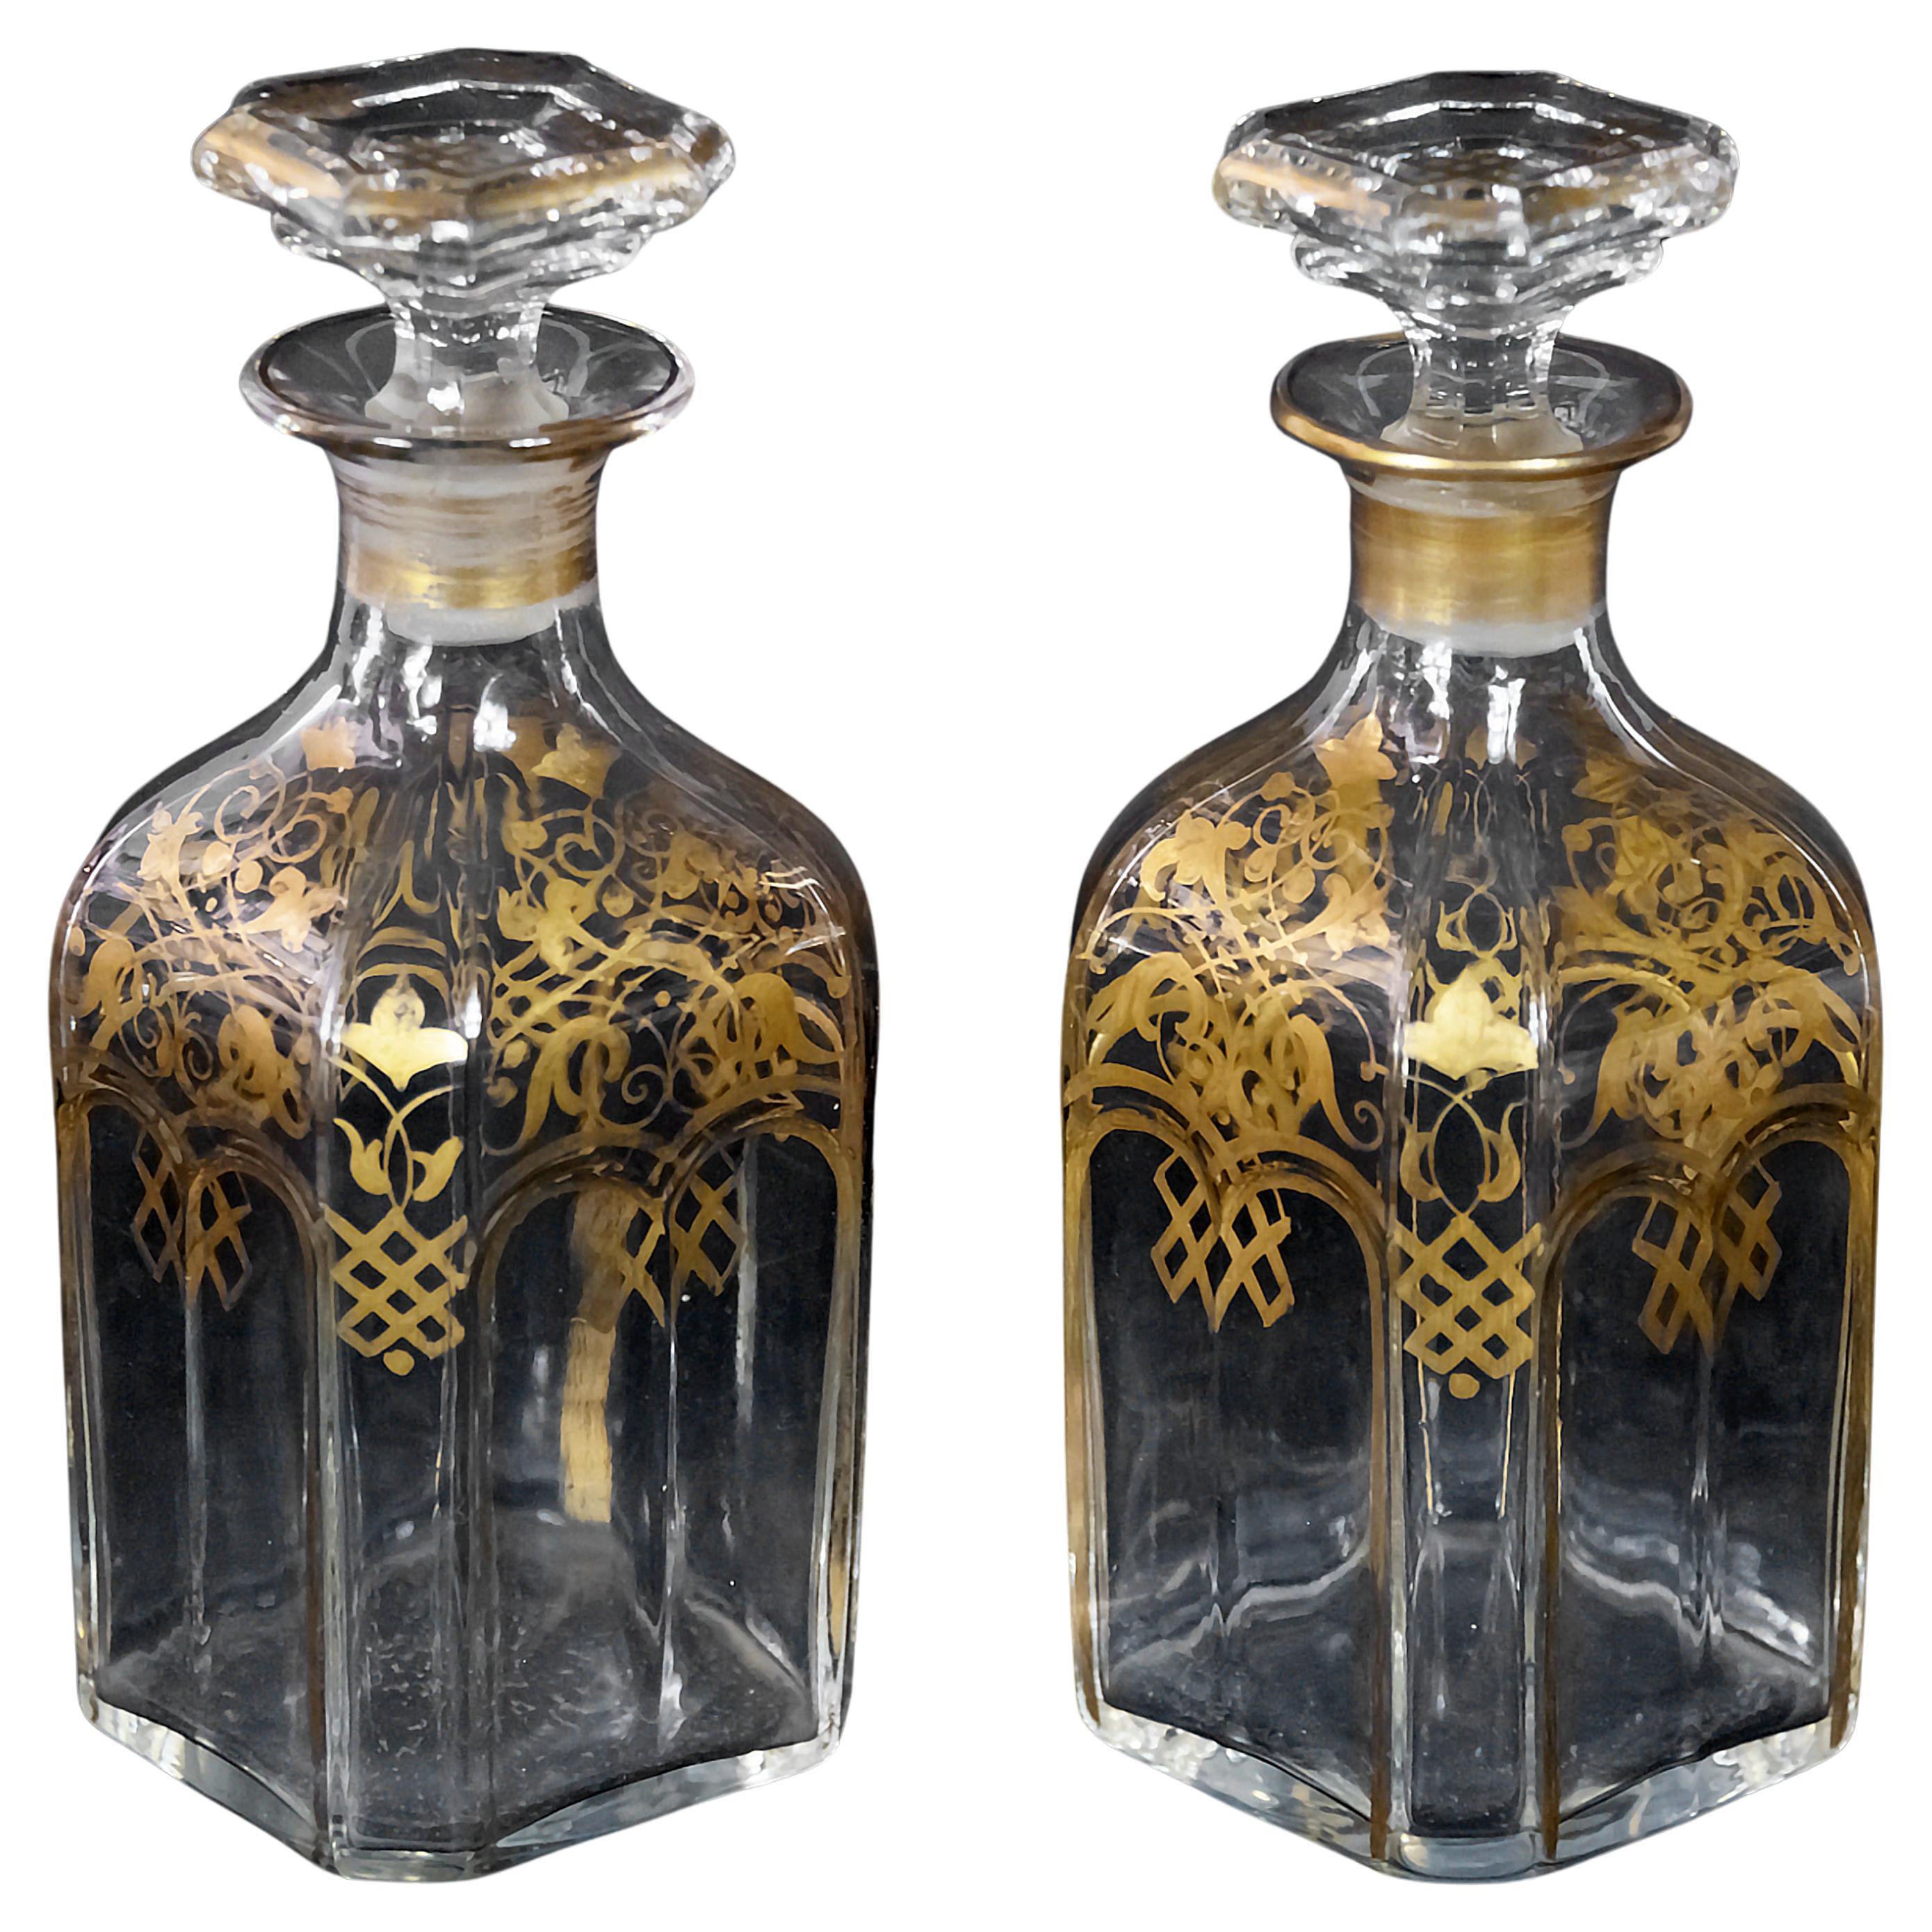 Pair of antique French Napoleon III Baccarat crystal square decanters with hand painted gold decor.
Very good antique condition.